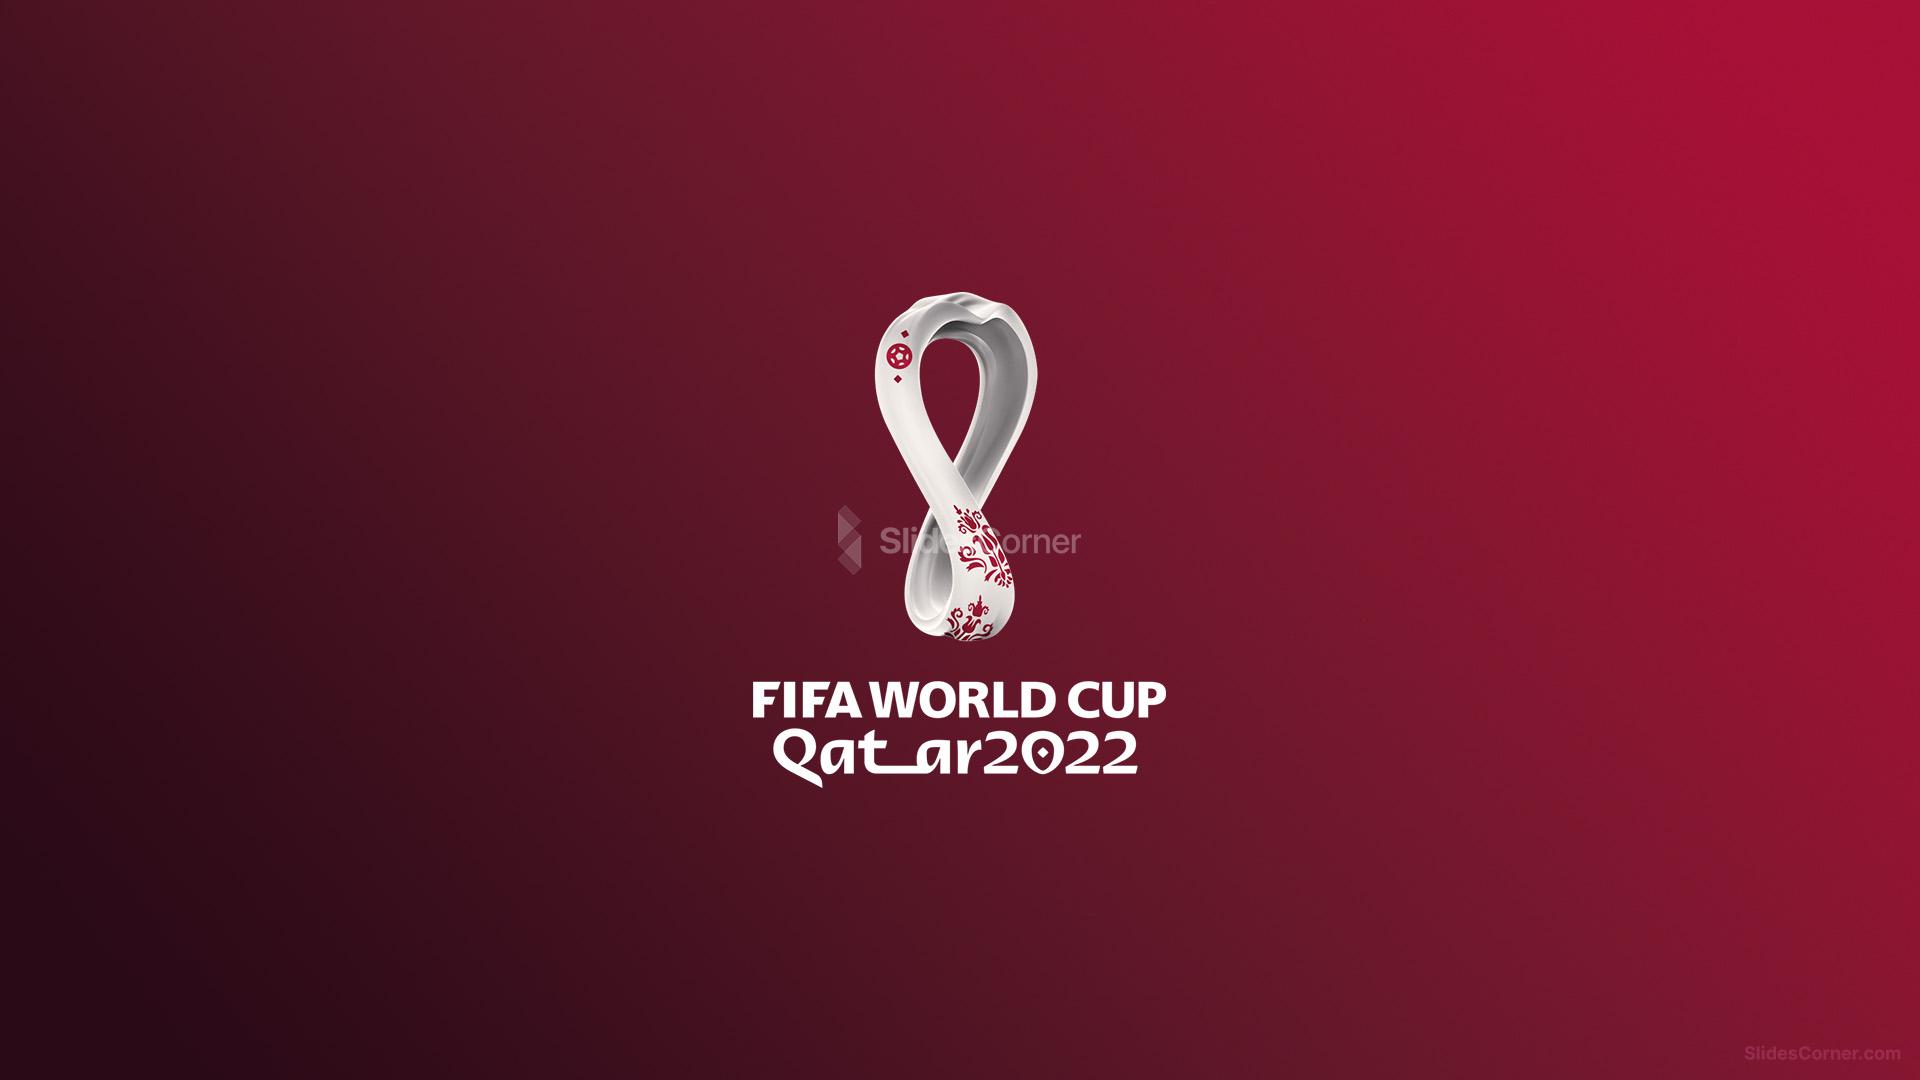 FIFA World Cup free PPT Background